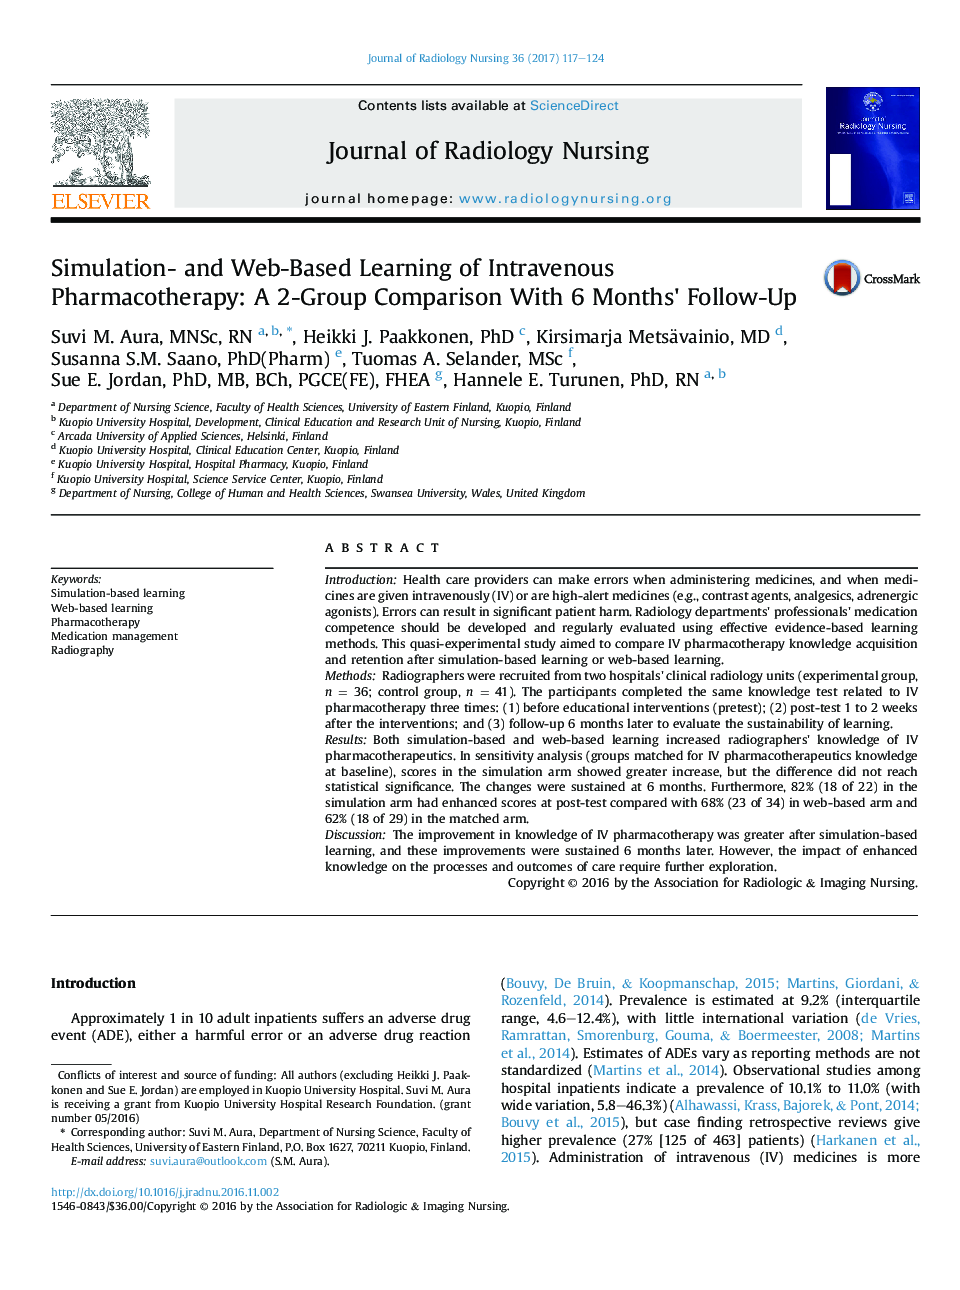 Simulation- and Web-Based Learning of Intravenous Pharmacotherapy: A 2-Group Comparison With 6 Months' Follow-Up